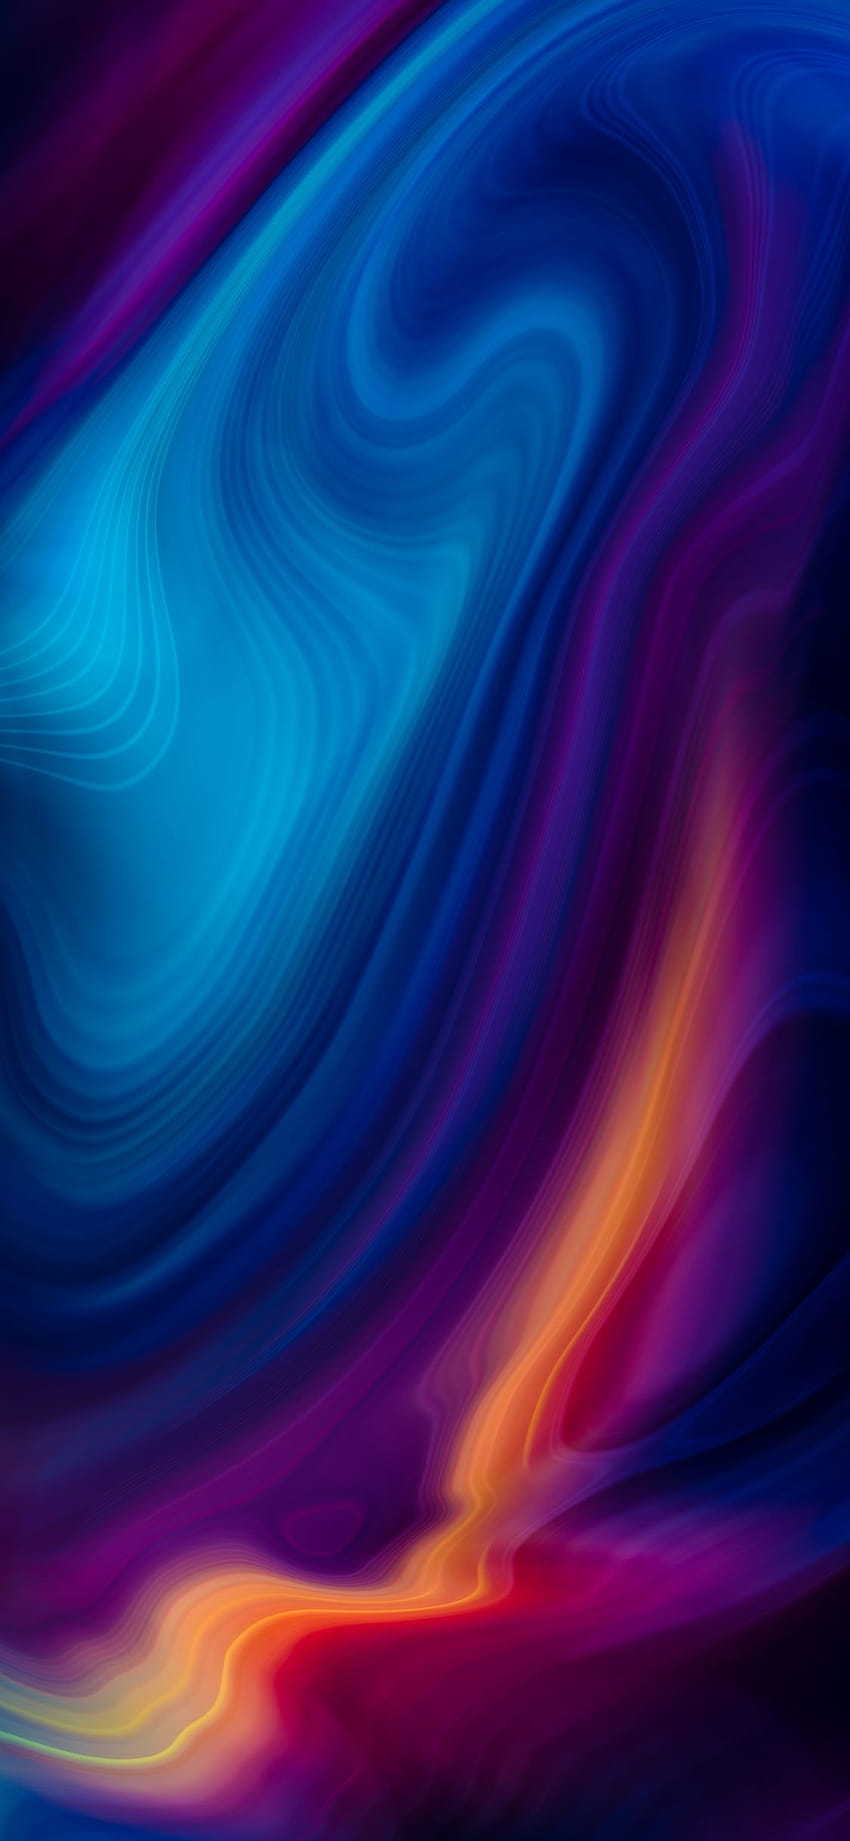 1125x2436 Mixed Colors Abstract Iphone XS,Iphone 10,Iphone X, iphone mix color HD phone wallpaper